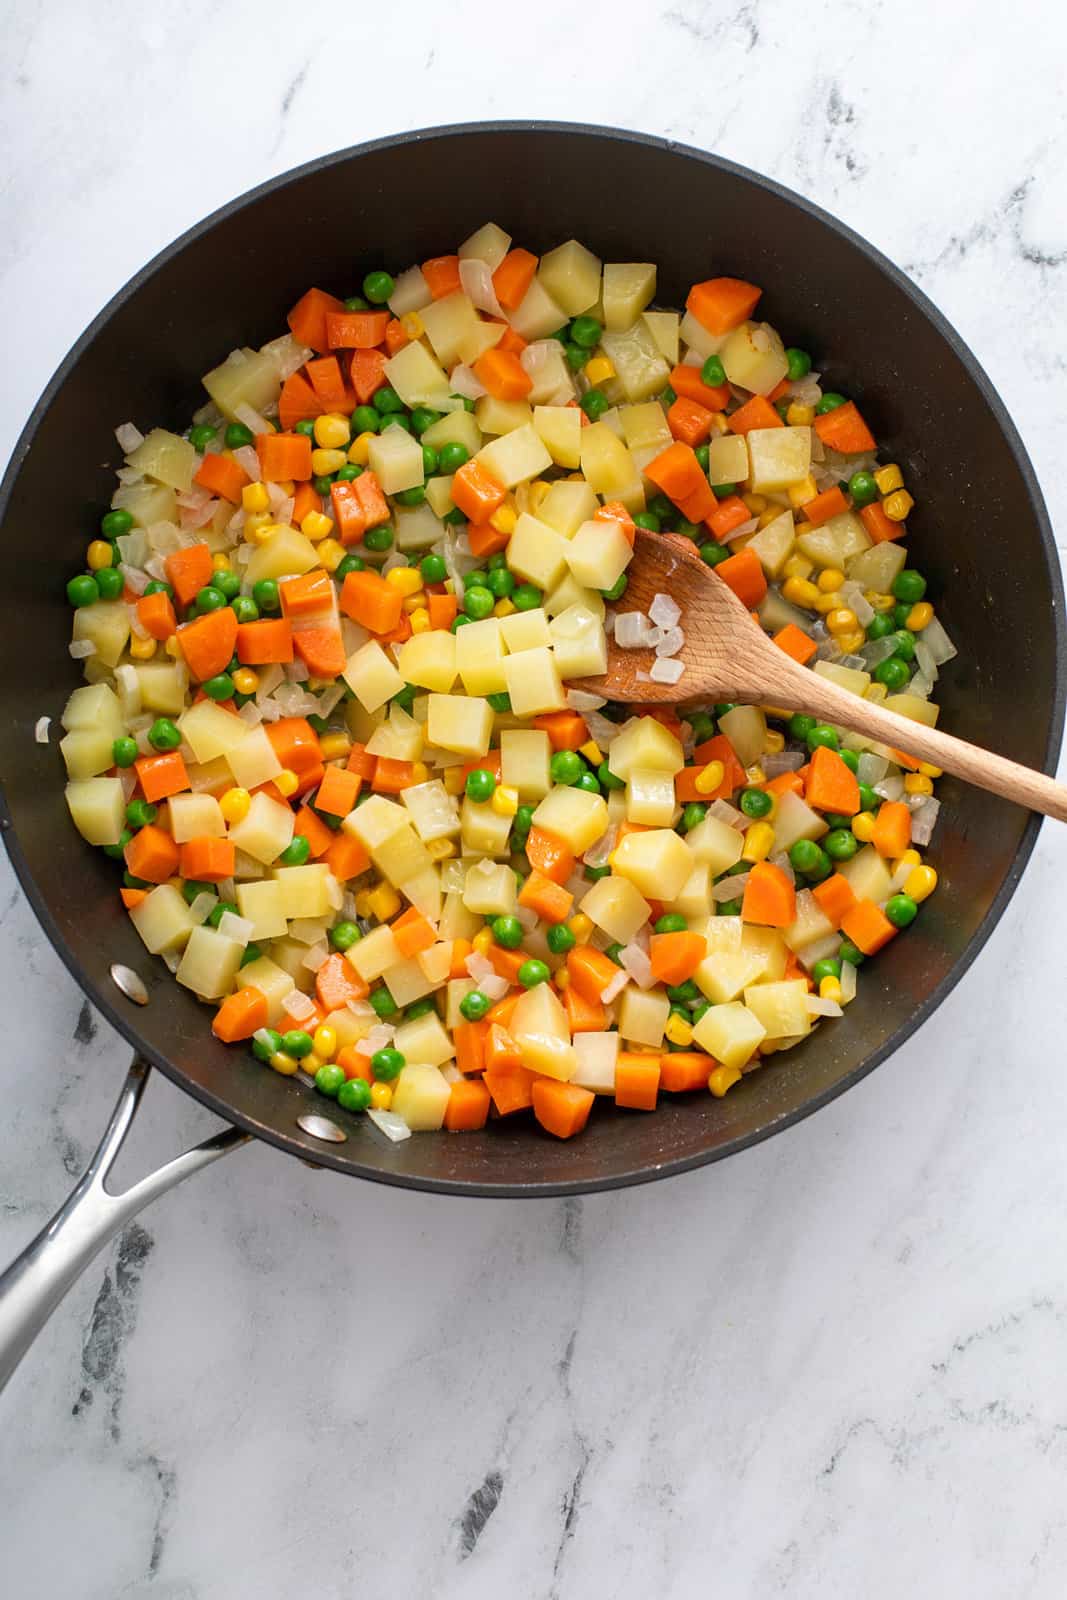 Cooked mixed vegetables in a black skillet.